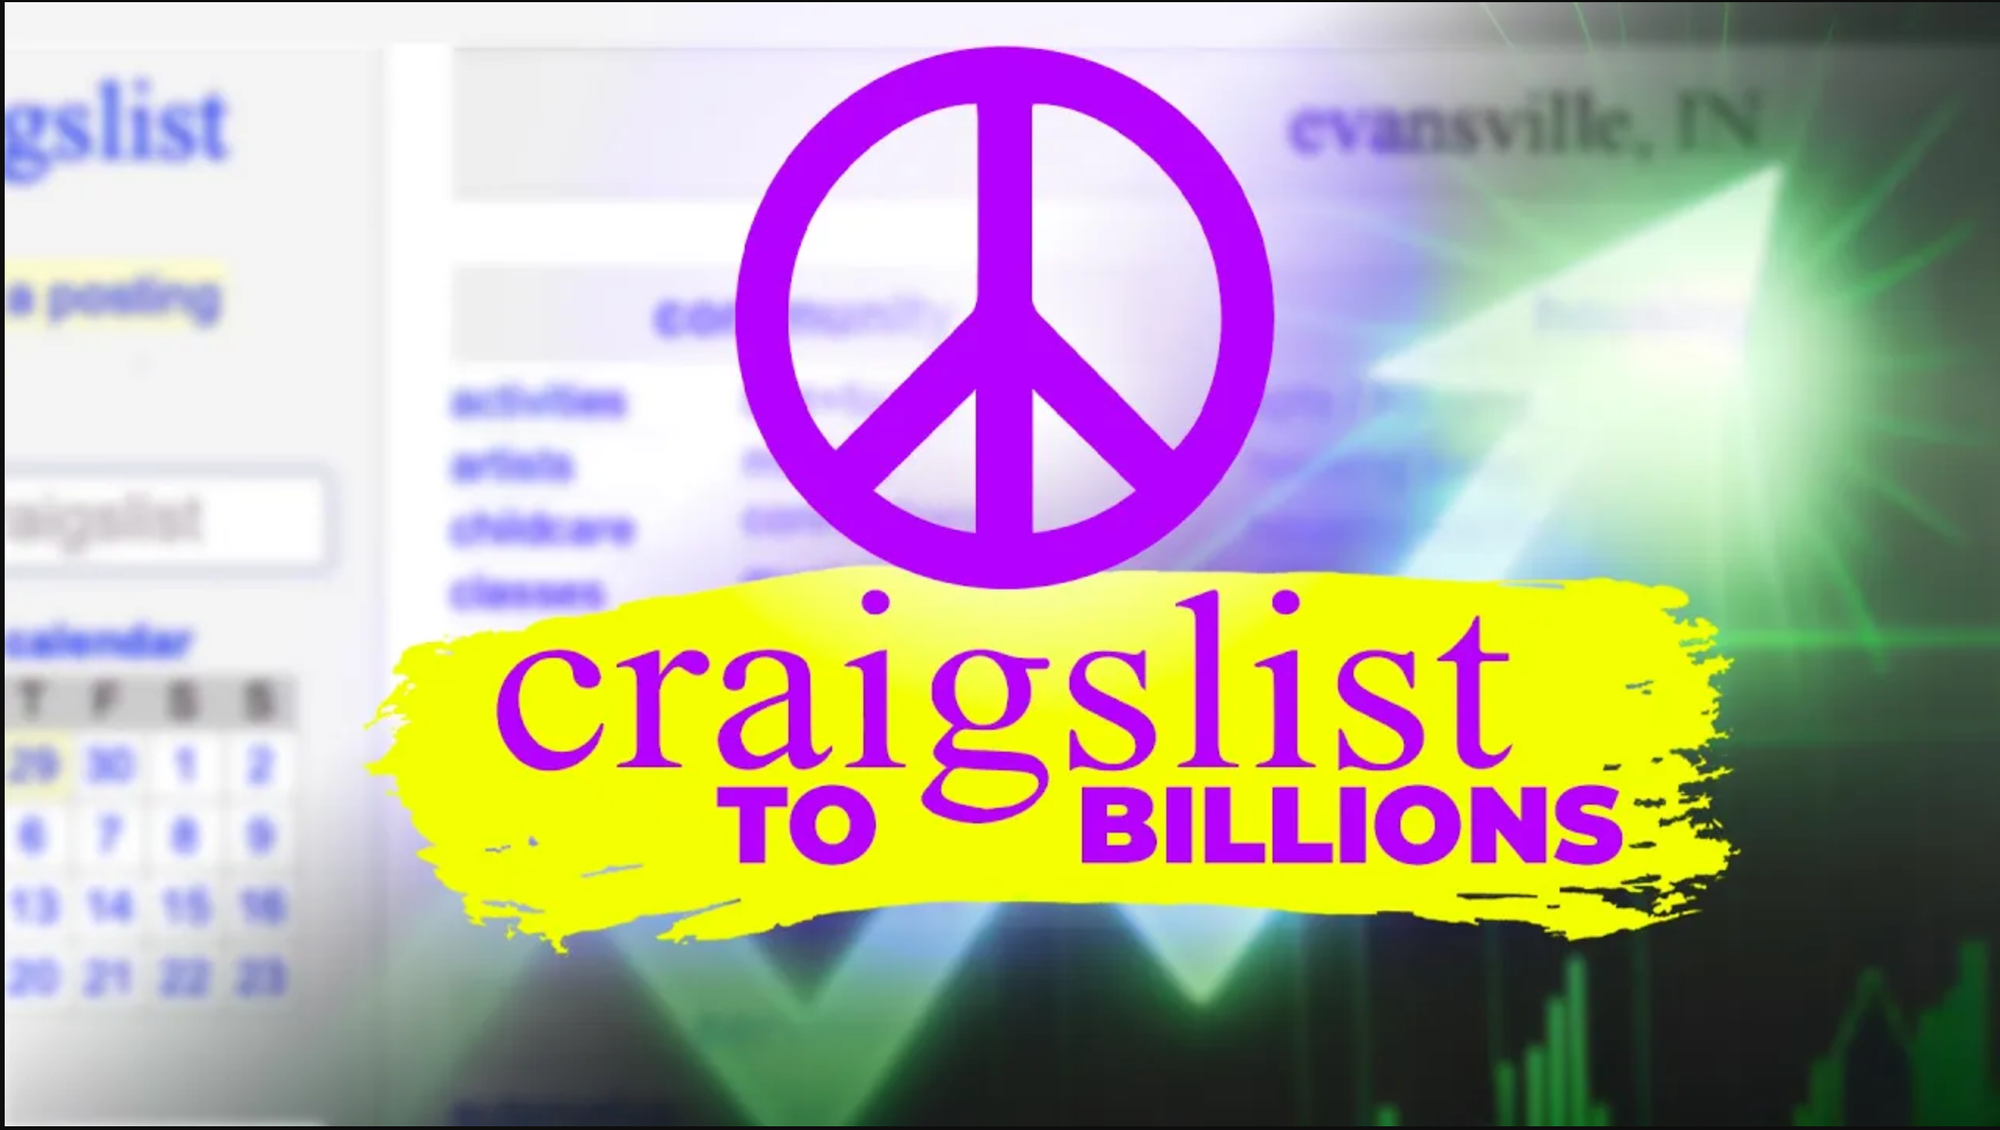 Bootstrapped: How Craigslist Organically Grew to Billions